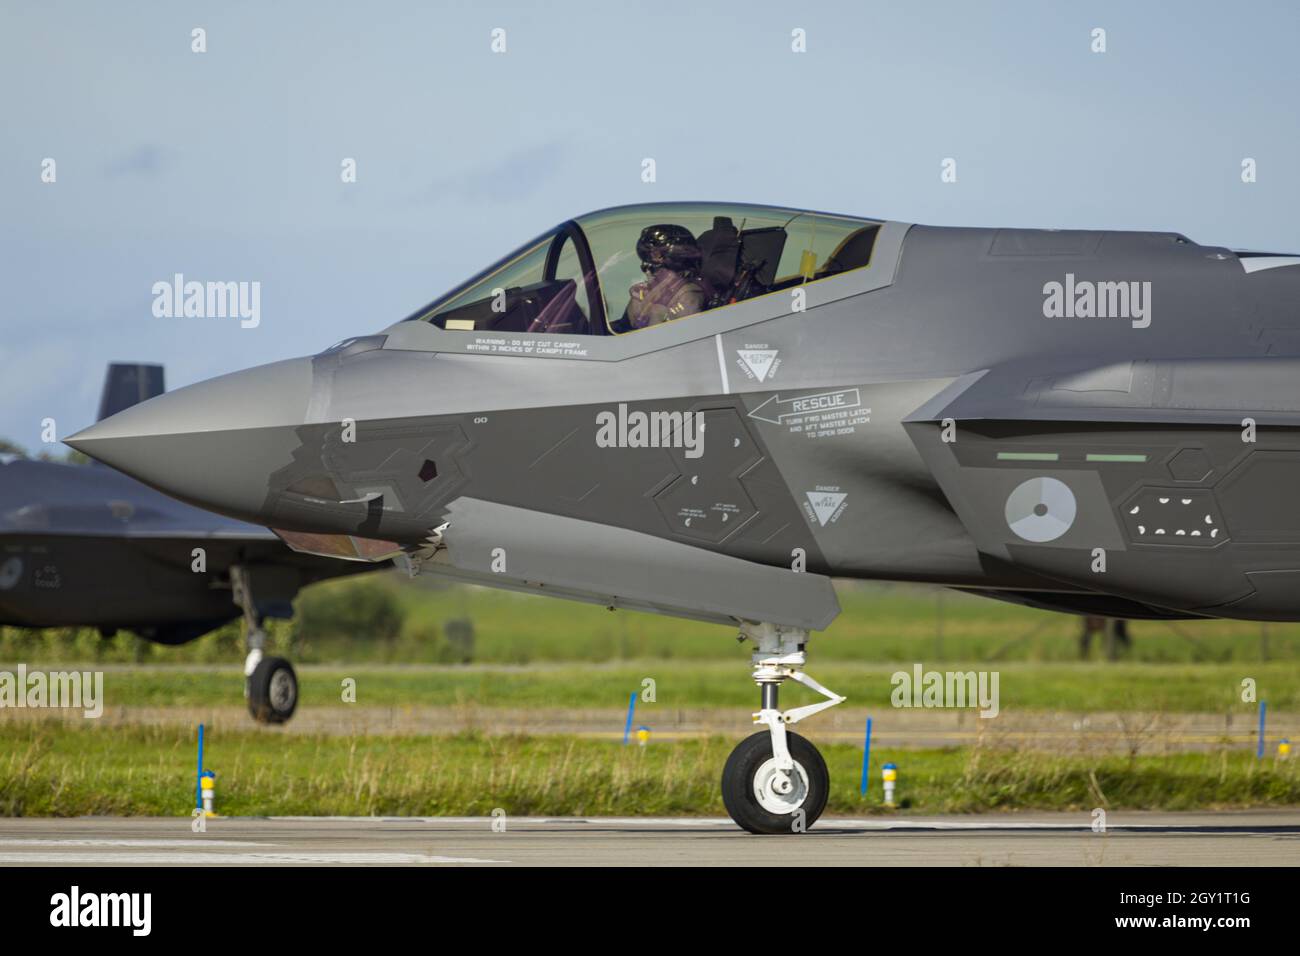 Leeuwarden Netherlands Oct. 4 2021 Weapon Instructor Course F-35 preparing for take off Stock Photo